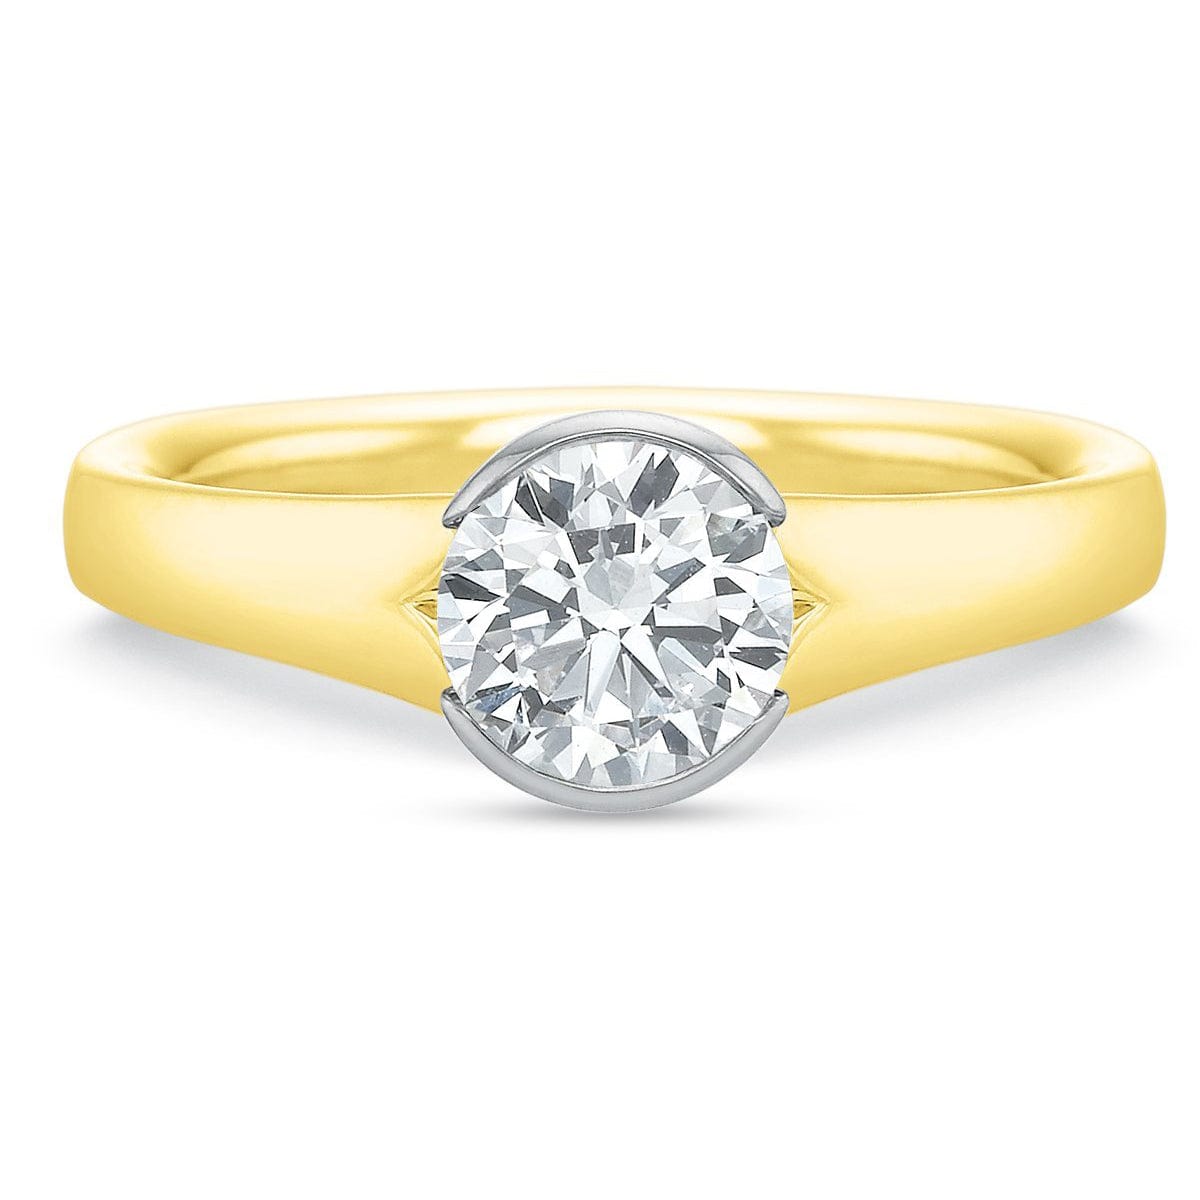 18K Yellow Gold Tapered Shank Half Bezel Set Solitaire Engagement Ring Setting